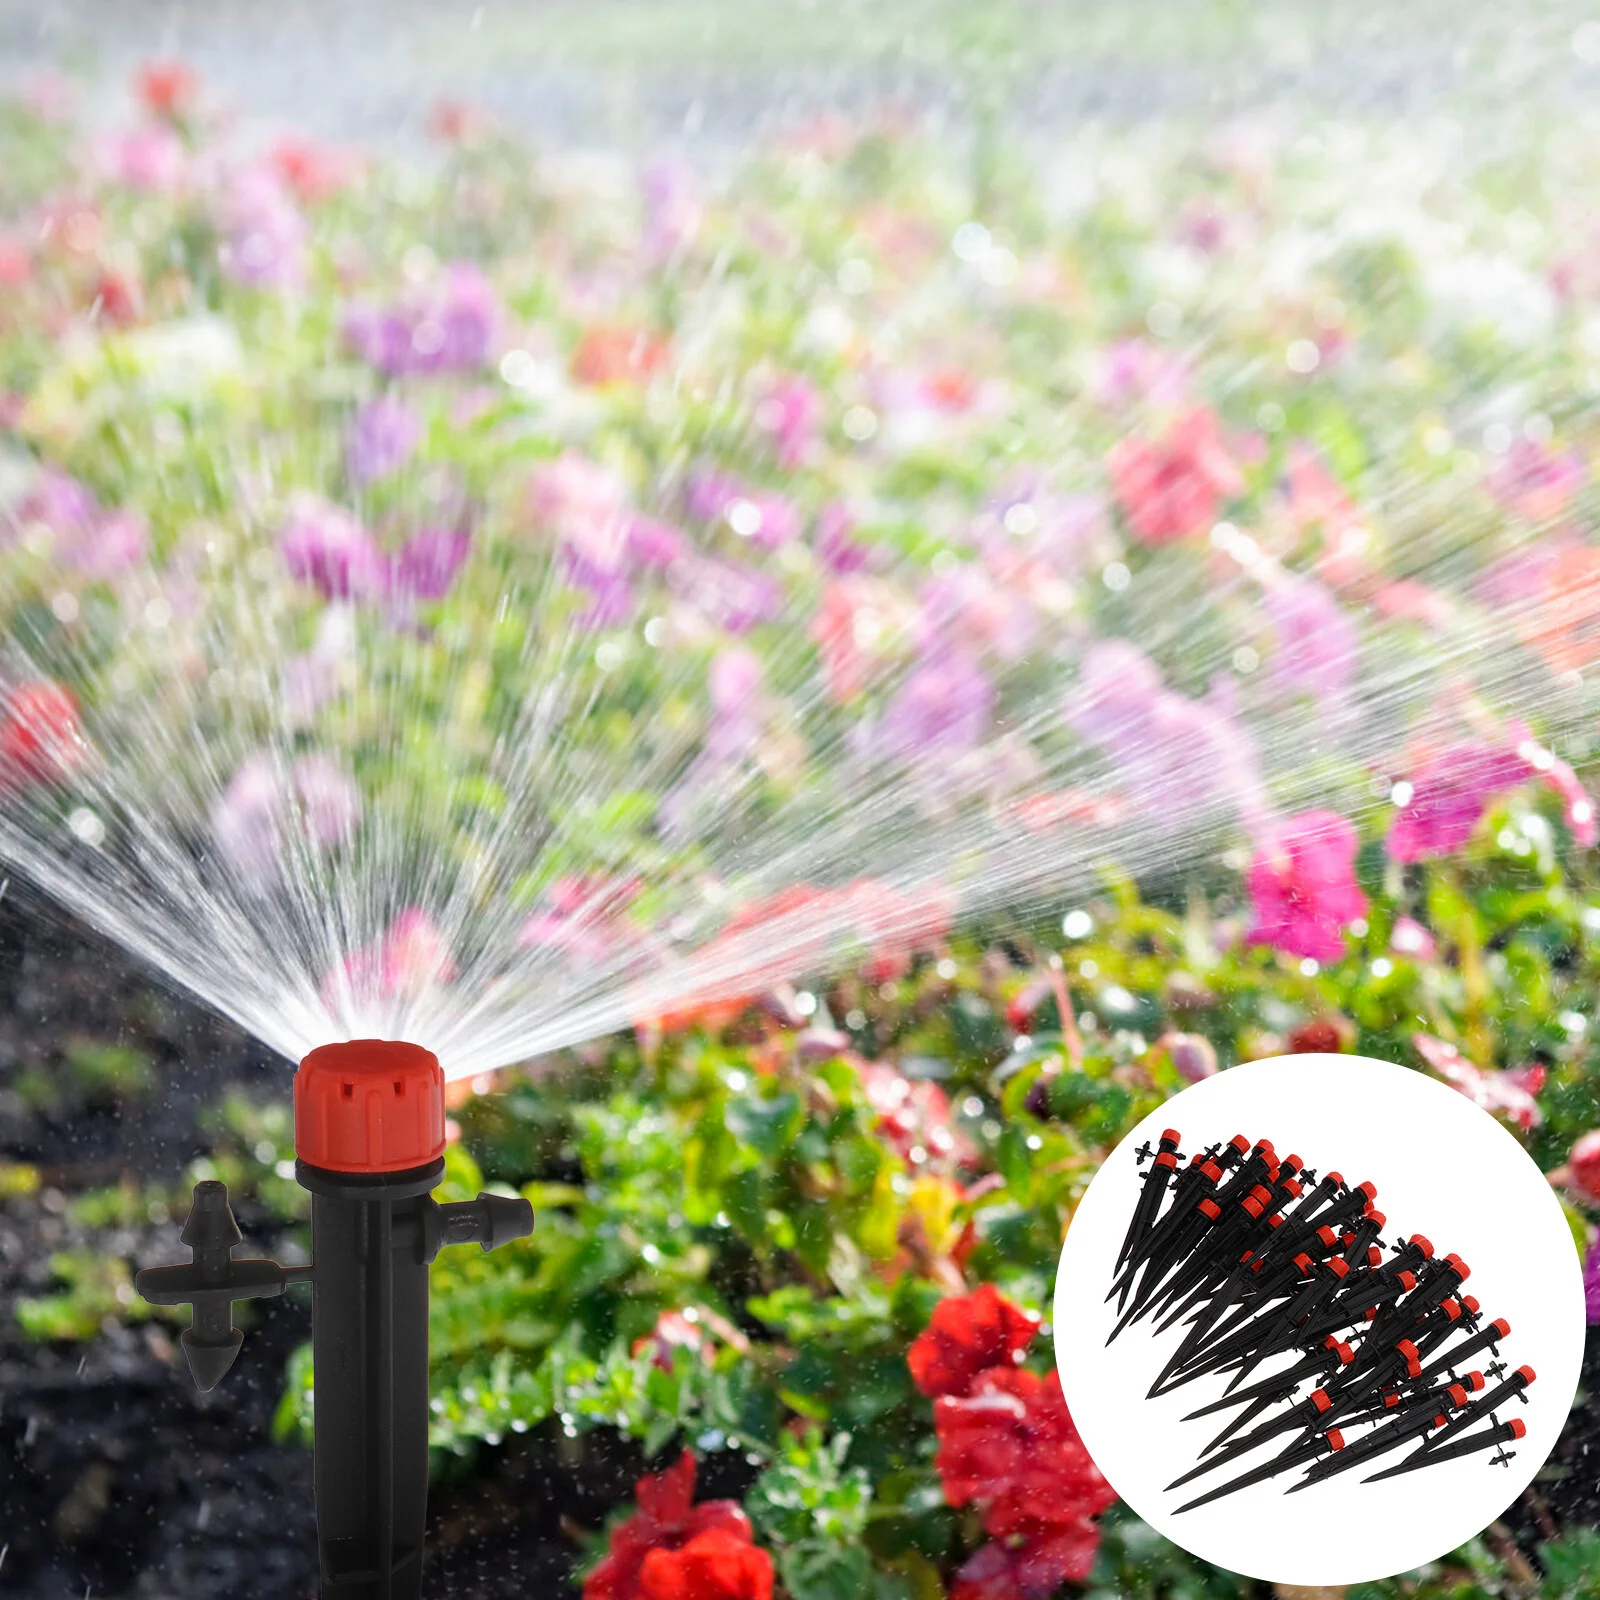 

Ground Micro Sprinkler Adjustable Irrigation Dripper Watering Nozzle Spray Nozzles Emitter Inserted